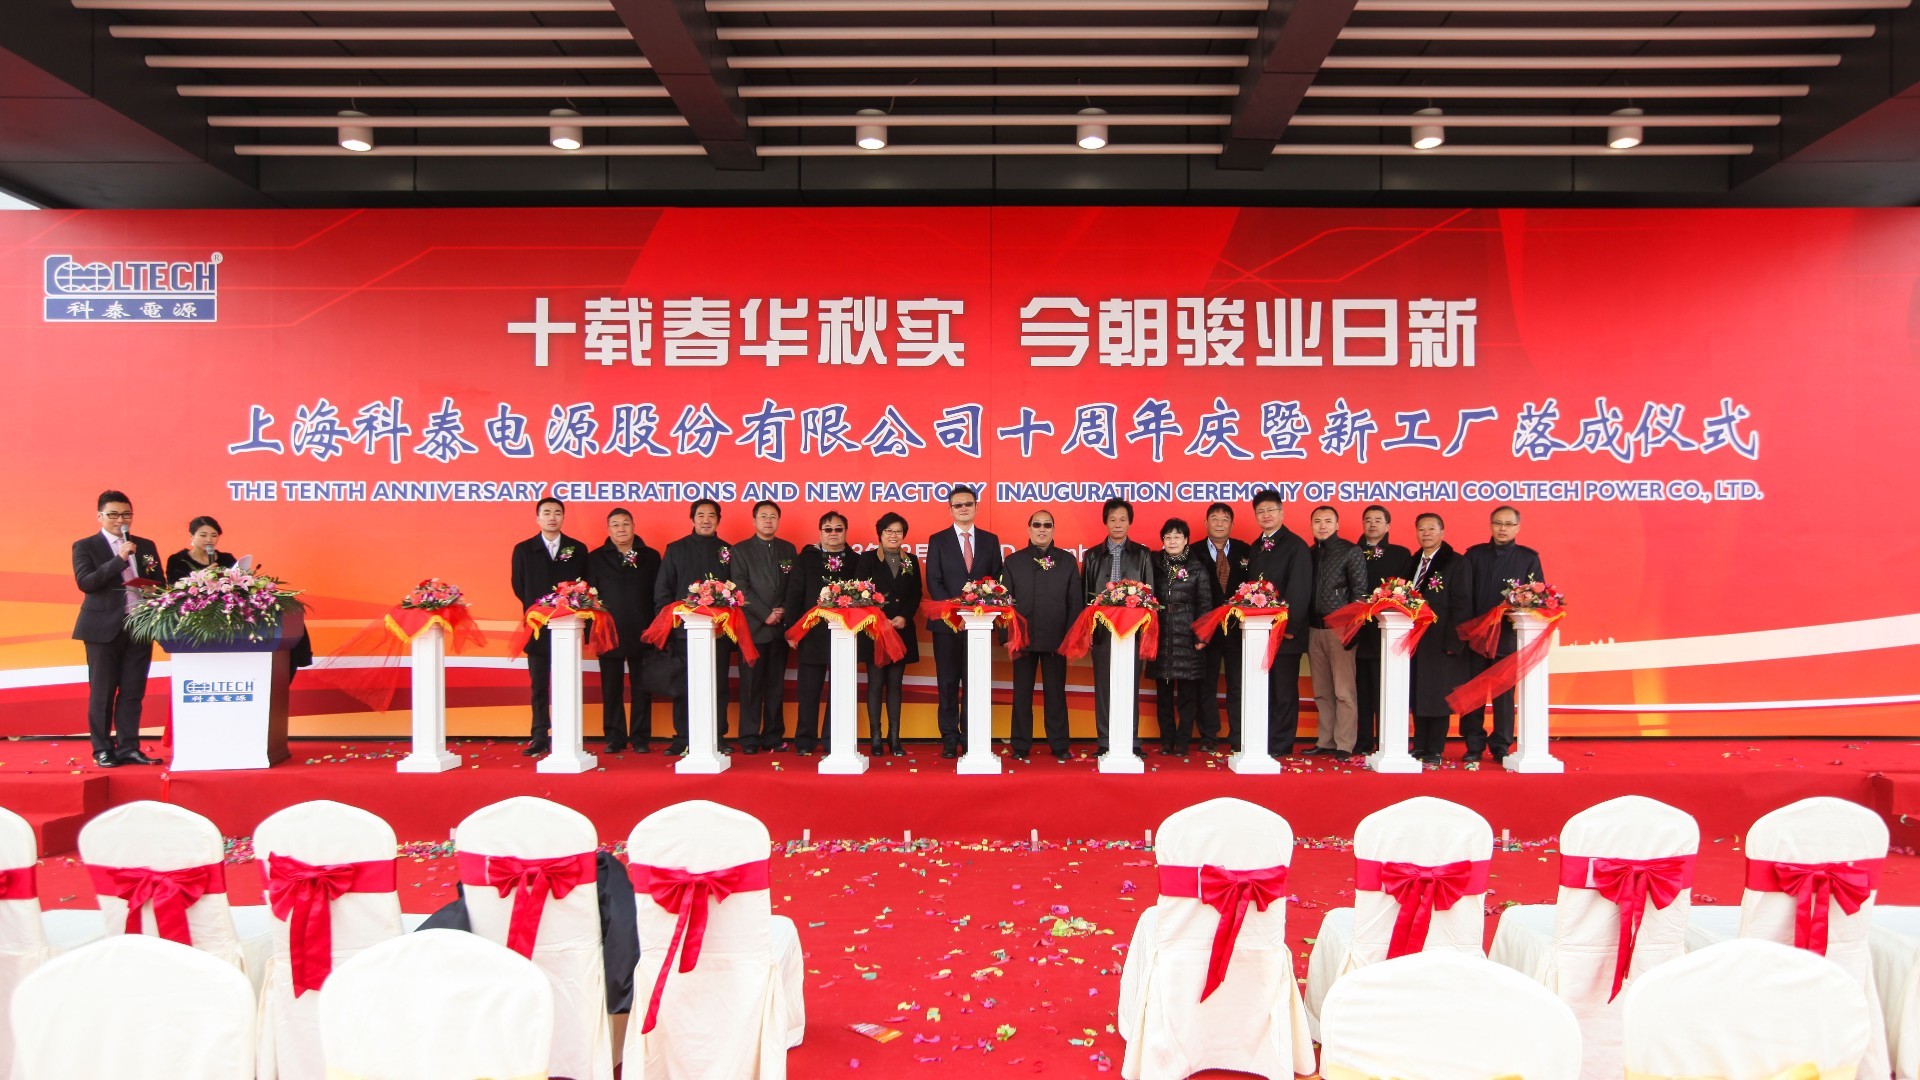 Celebratory activity for 10th anniversary of Cooltech and inauguration ceremony of new plant in 2013